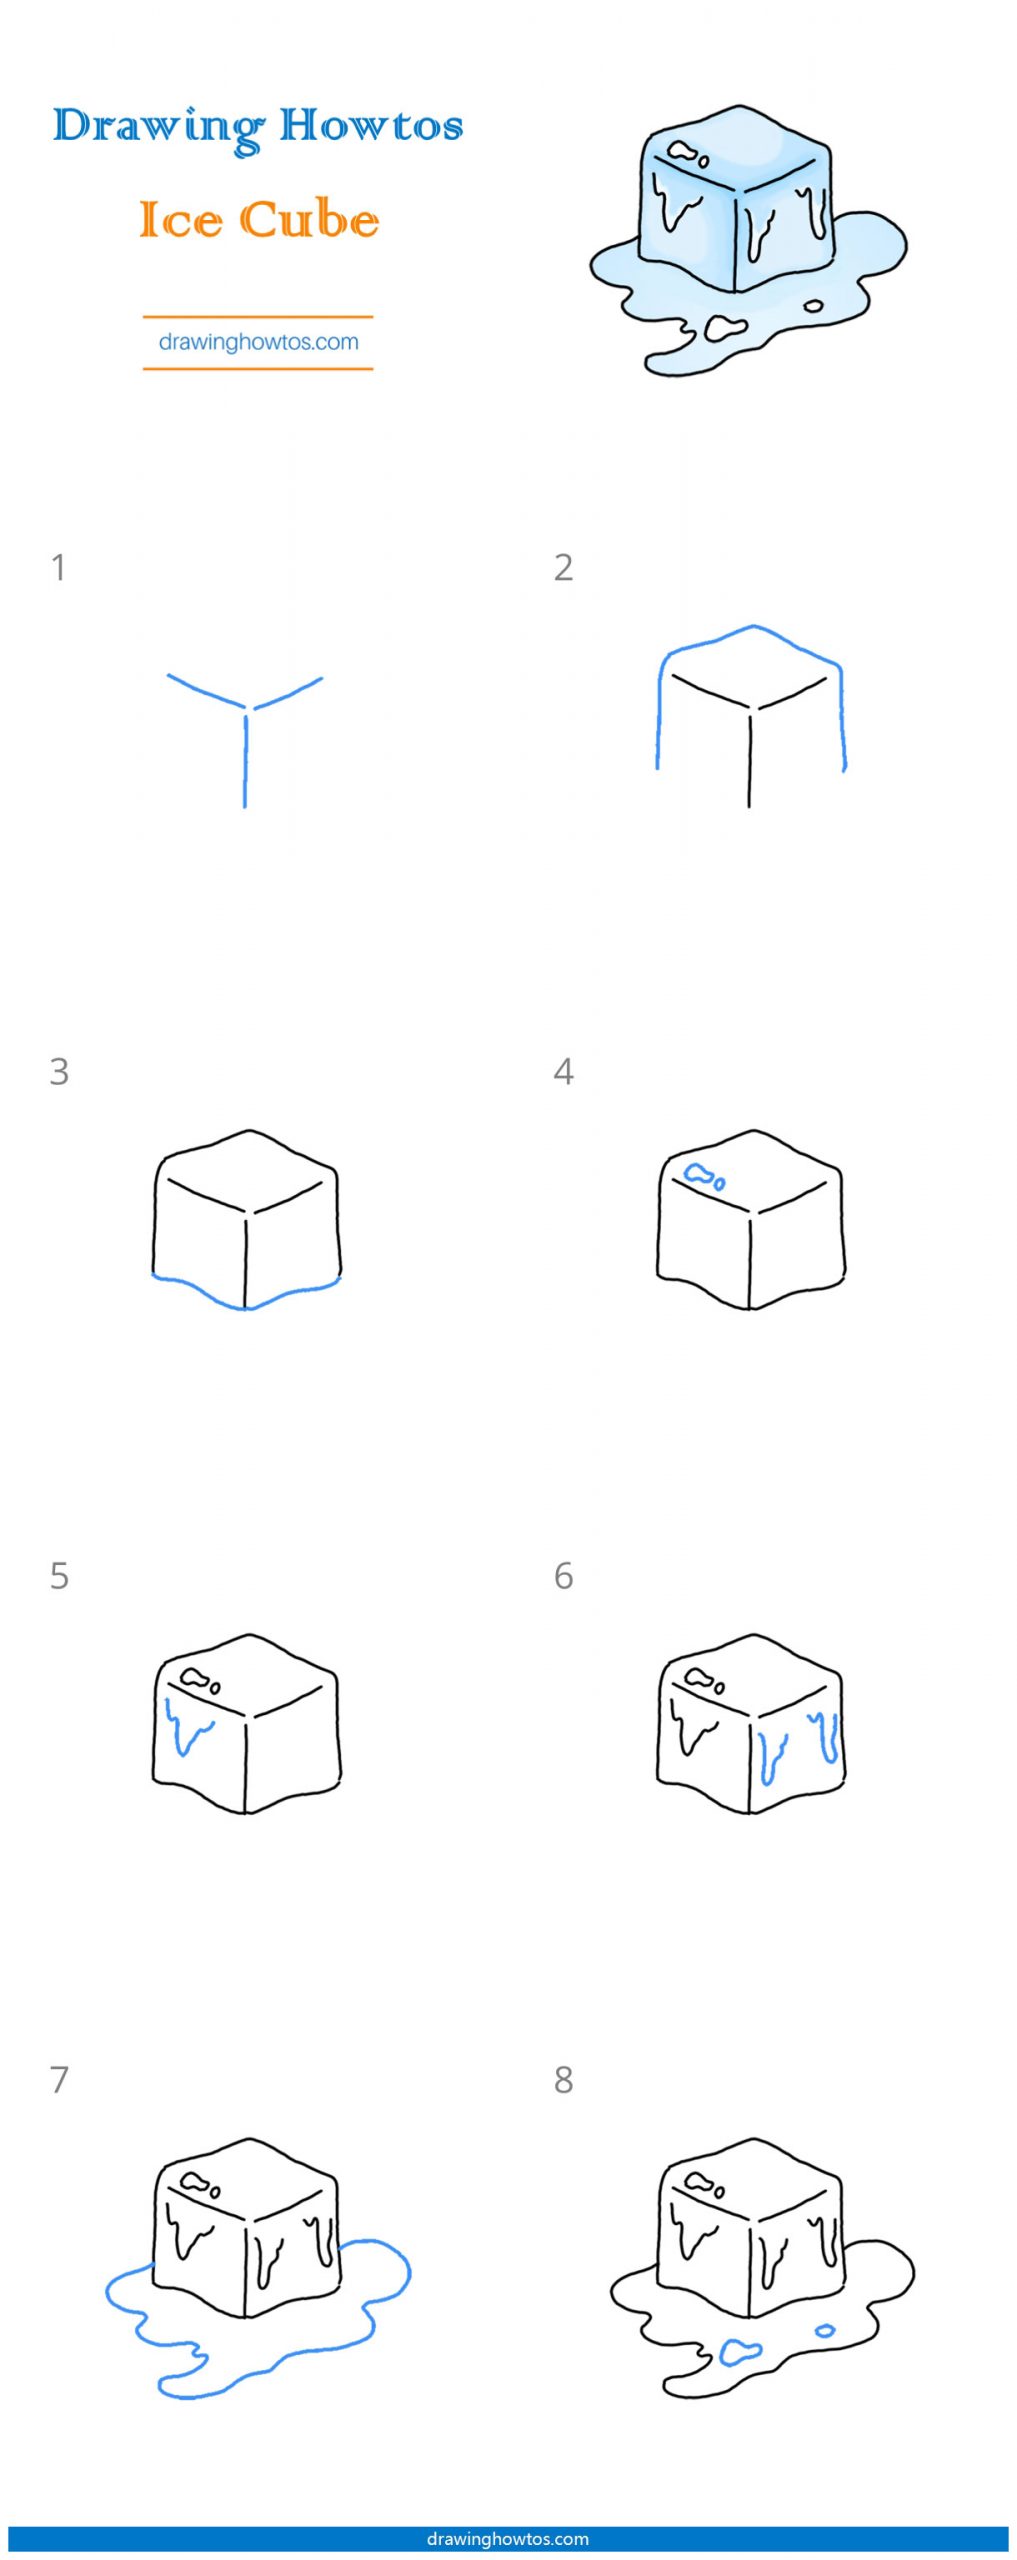 How to Draw an Ice Cube Step by Step